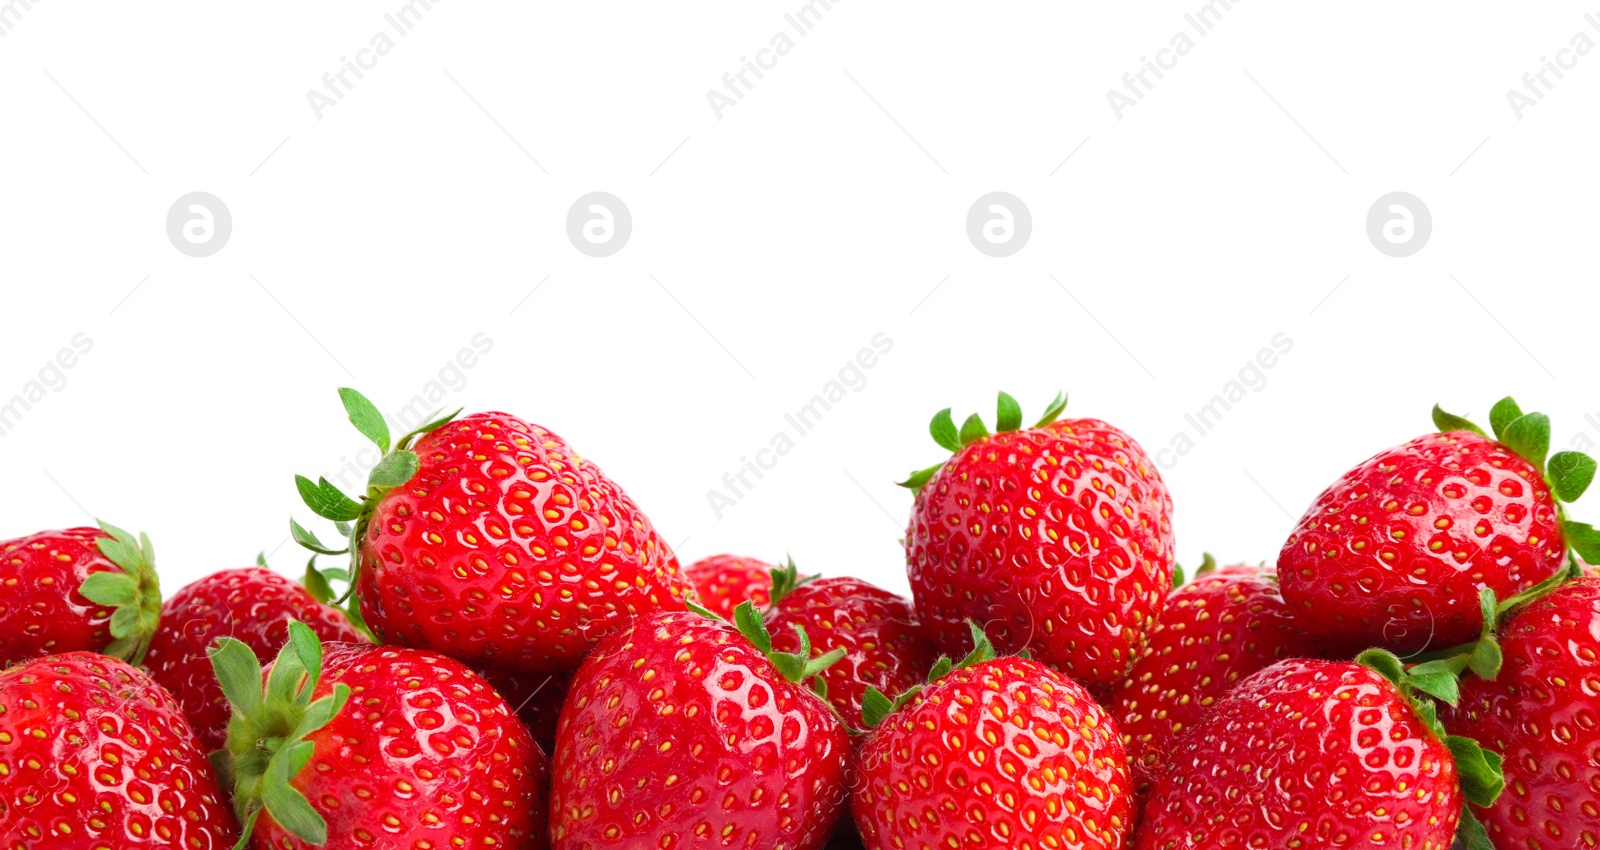 Photo of Pile of delicious fresh red strawberries on white background